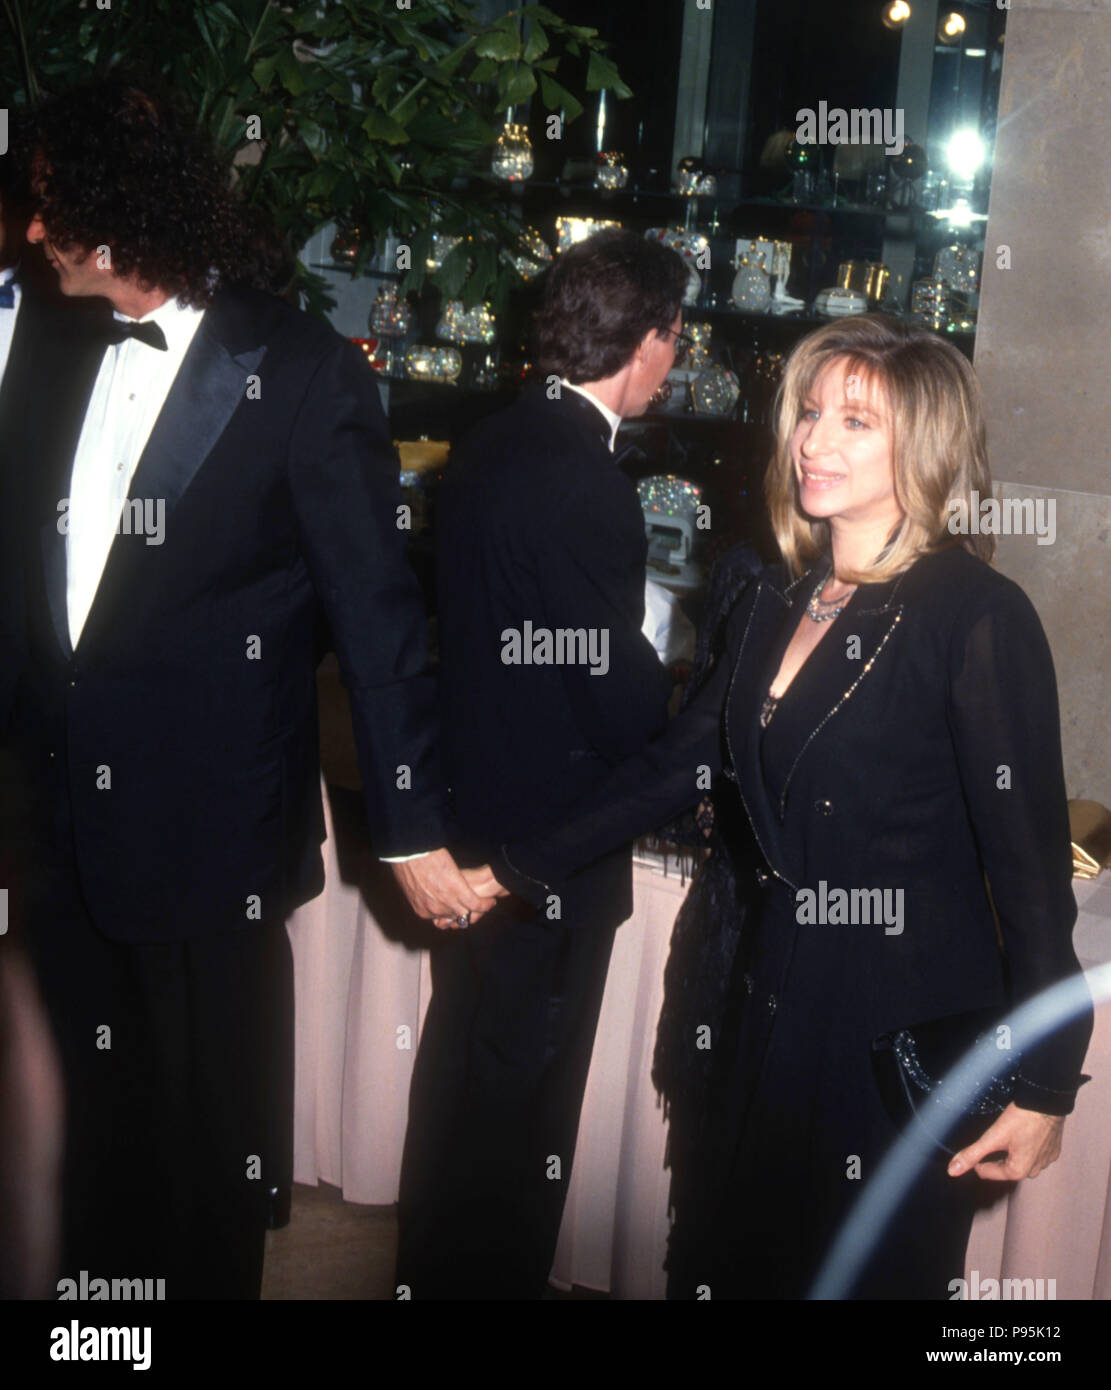 BEVERLY HILLS, CA - MARCH 14: Composer Richard Baskin and singer/director Barbra Streisand attend the 44th Annual Directors Guild of America Awards on March 14, 1992 at the Beverly Hilton Hotel in Beverly Hills, California. Photo by Barry King/Alamy Stock Photo Stock Photo